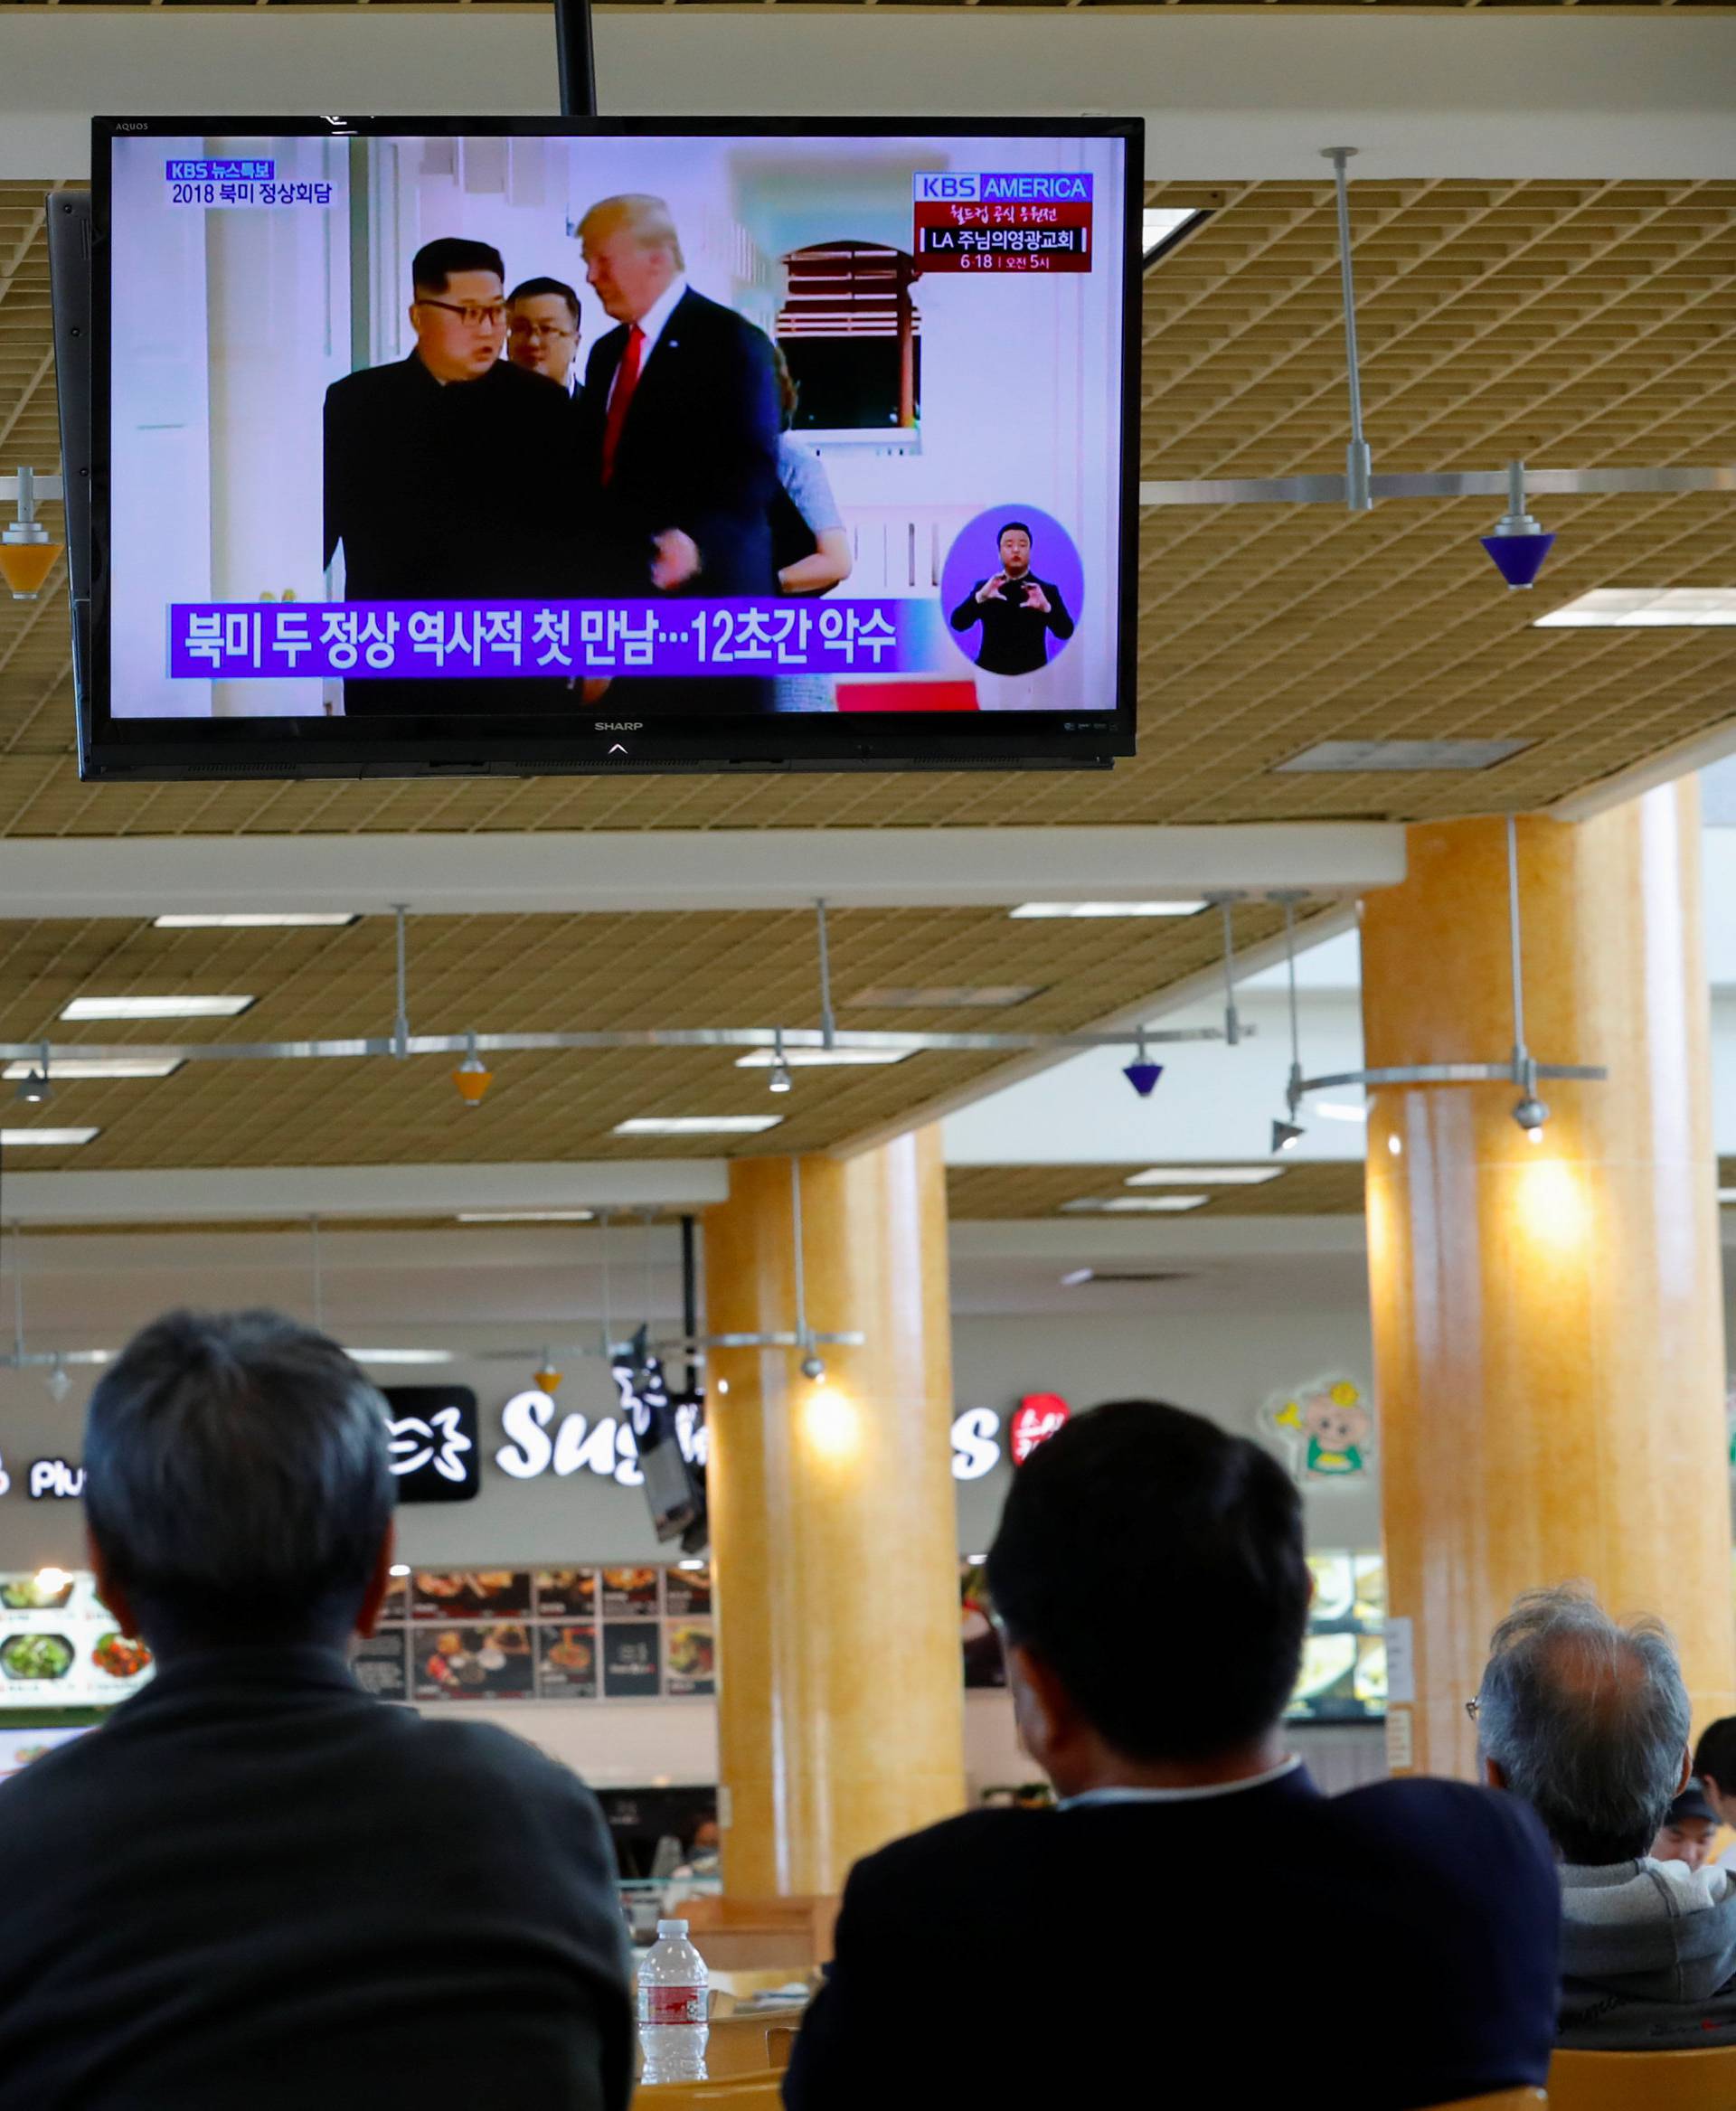 People watch from a shopping mall food court  in the Los Angeles neighborhood of Koreatown as Singapore hosts a summit between U.S. President Donald Trump and North Korean leader Kim Jong Un in Los Angeles